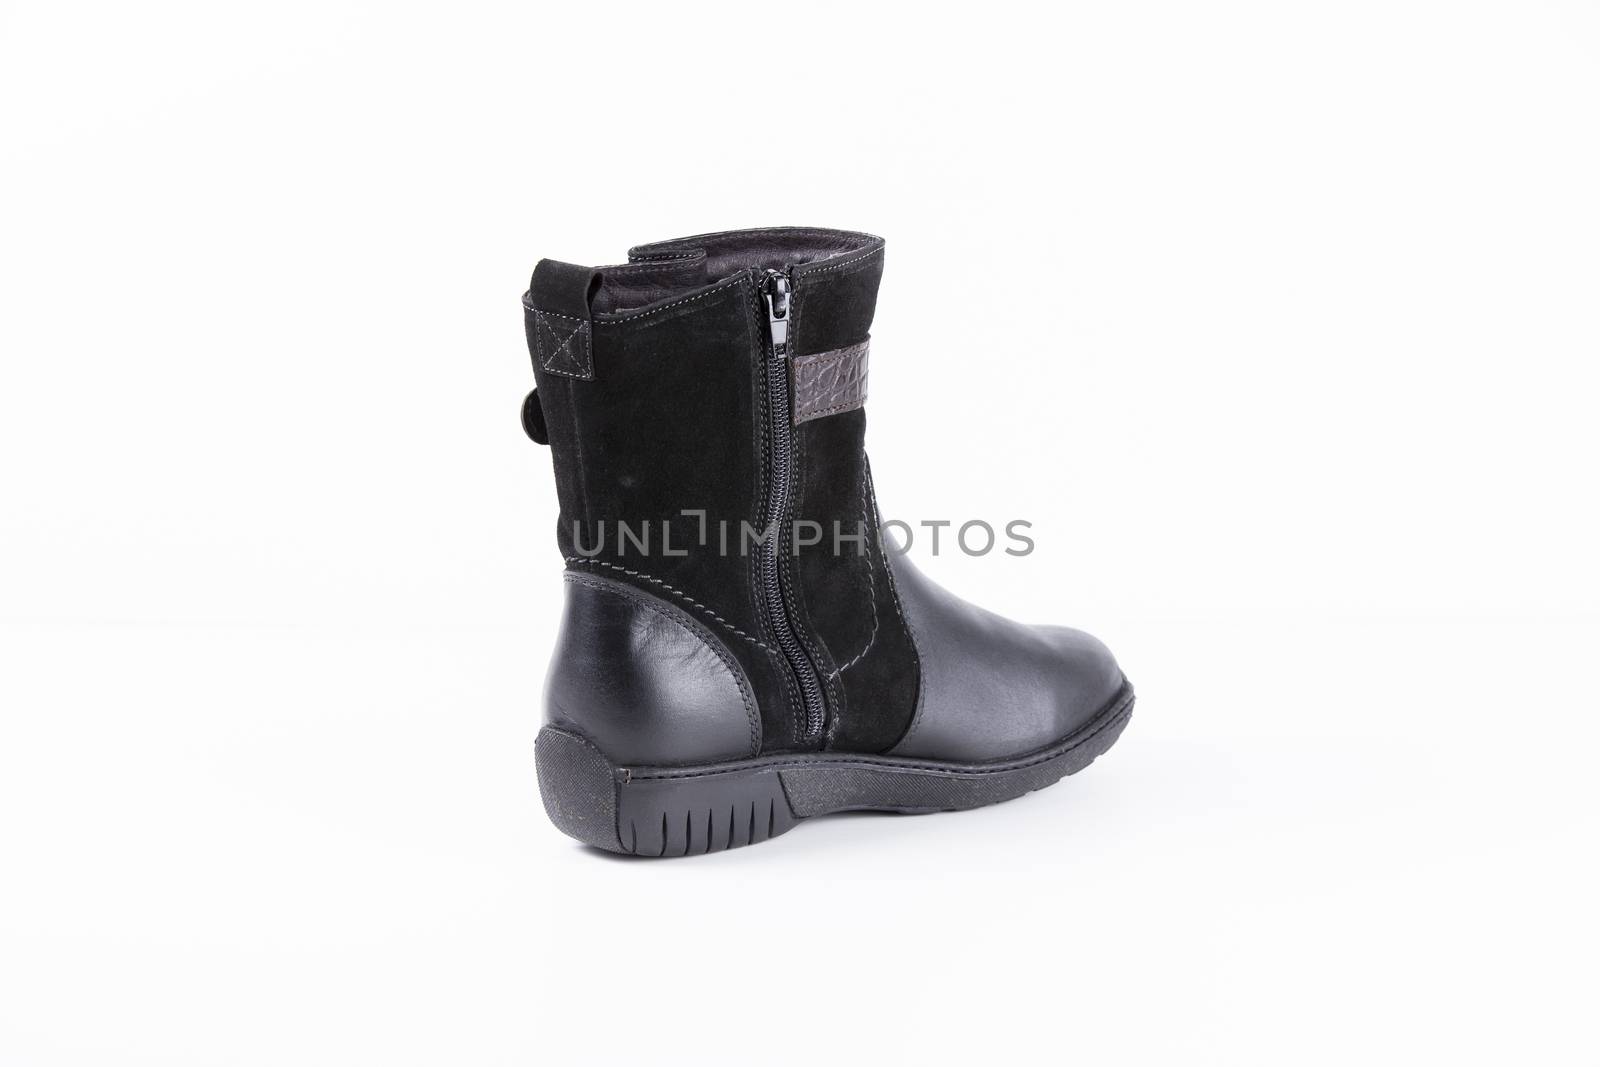 Black leather boots on white background, isolated product. by GeorgeVieiraSilva